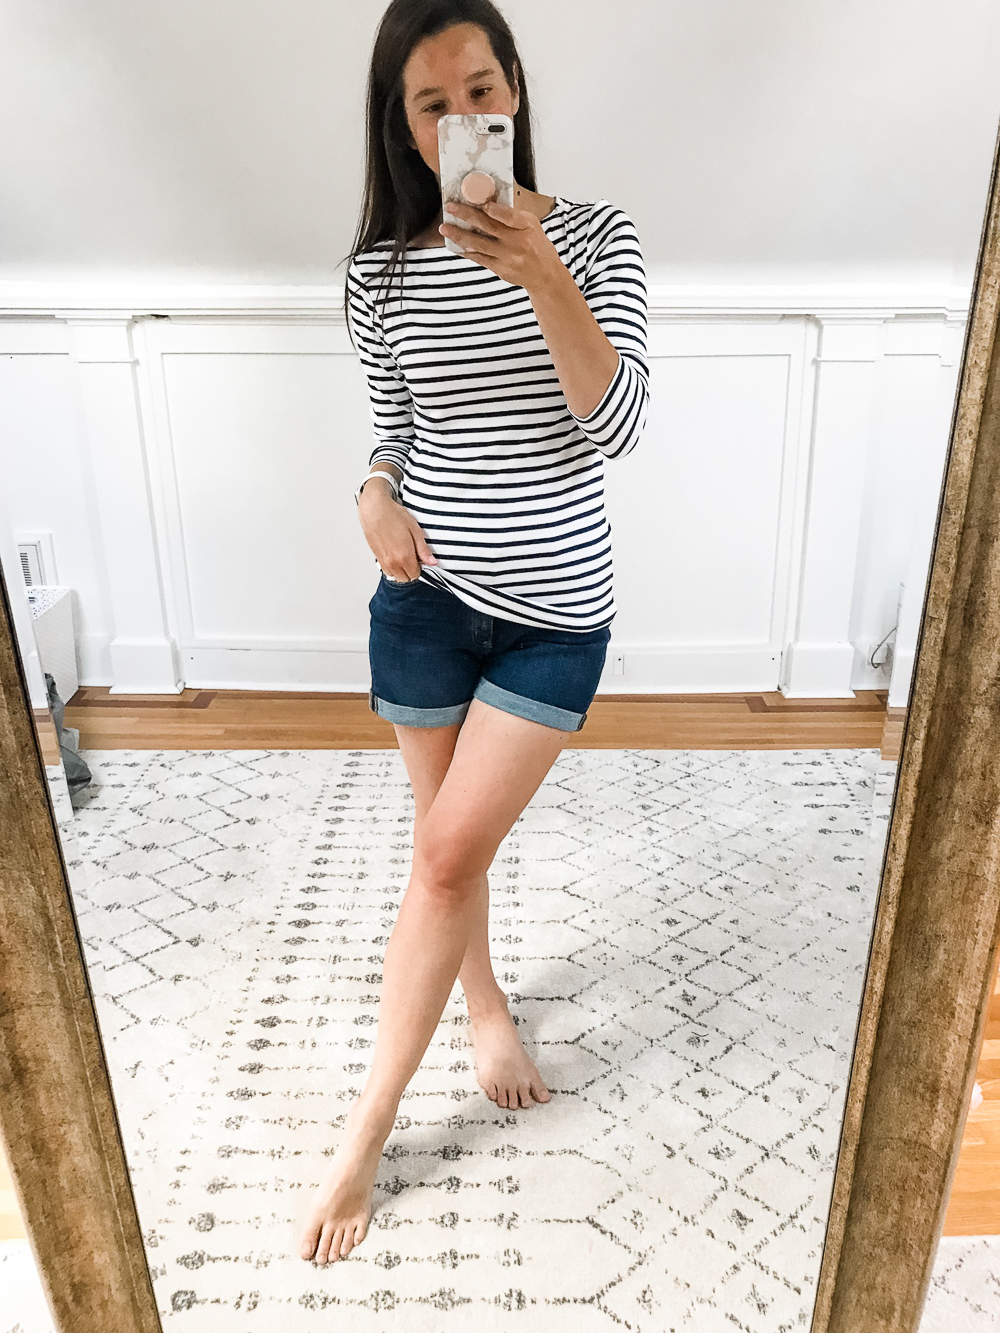 Amazon Essentials 3/4 Sleeve Boatneck Top and Amazon 5" Denim Shorts, Amazon Prime Day Try-On Haul: Top Affordable Fashion Finds